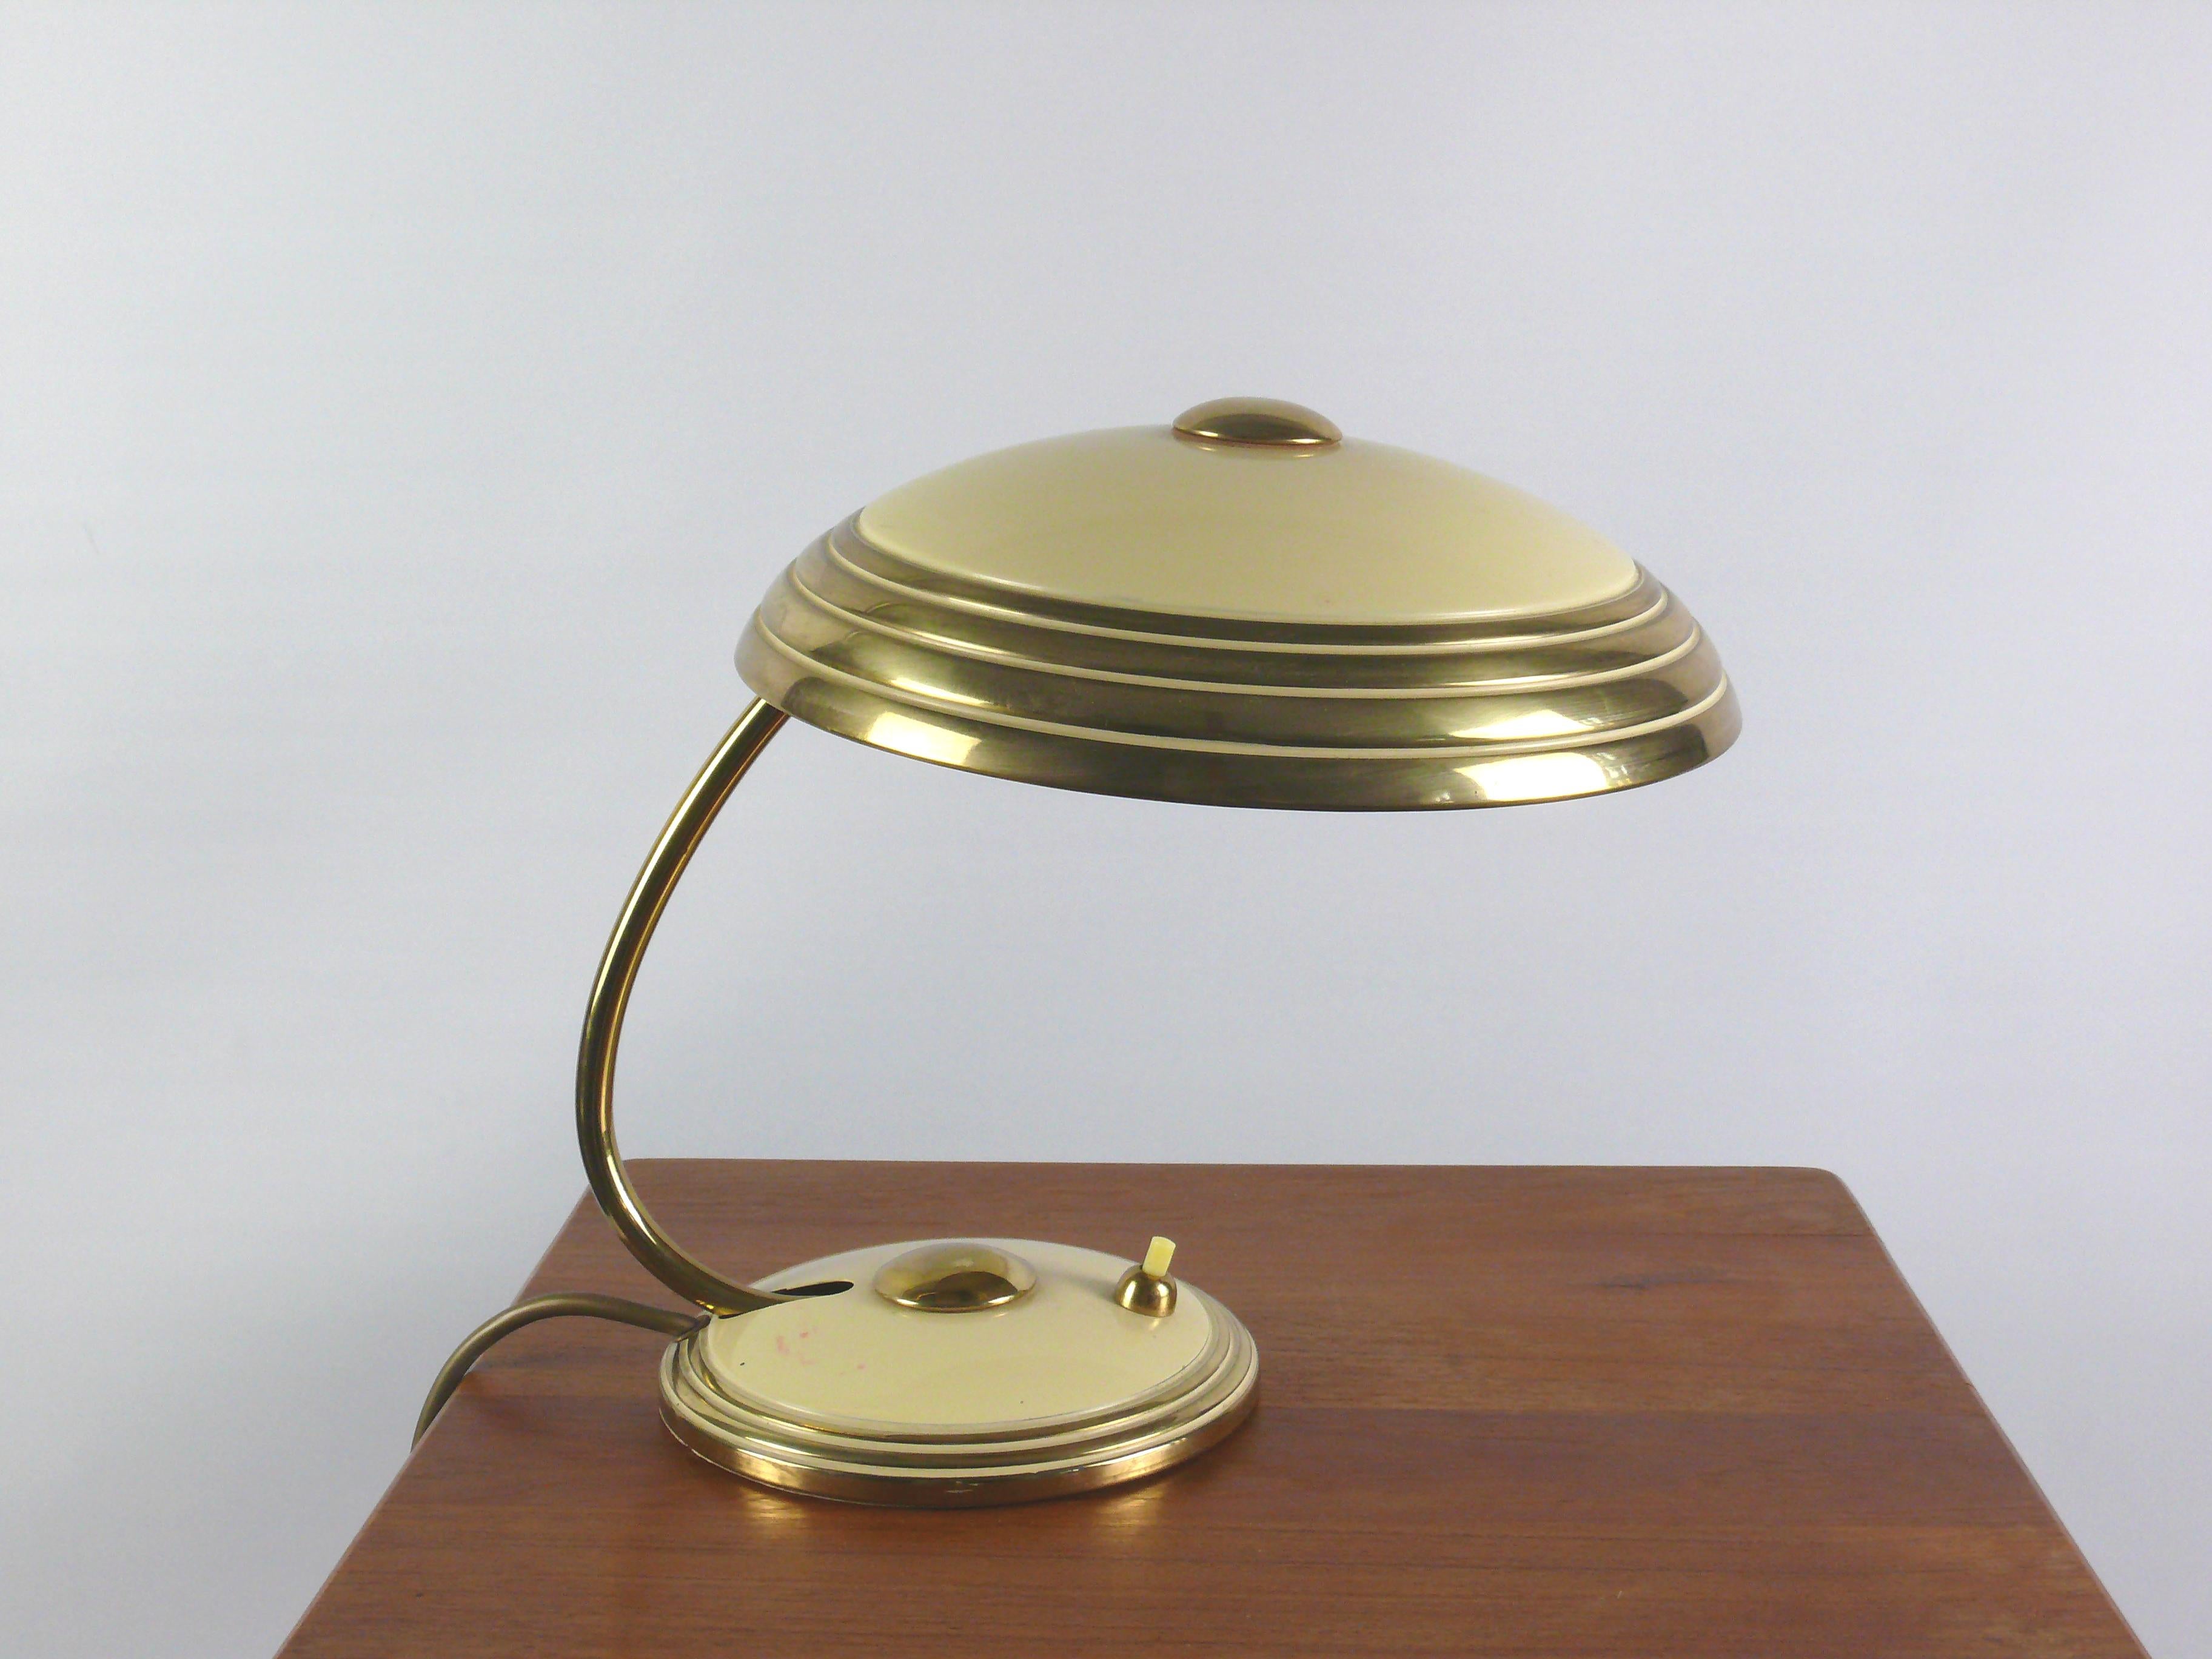 Well-preserved Helo table lamp, a timeless classic from the 1950s. The slight difference between the beige, painted areas and the shiny brass parts gives the lamp a noble calm. Stylistically, the design of the lamp is based on the Bauhaus period.